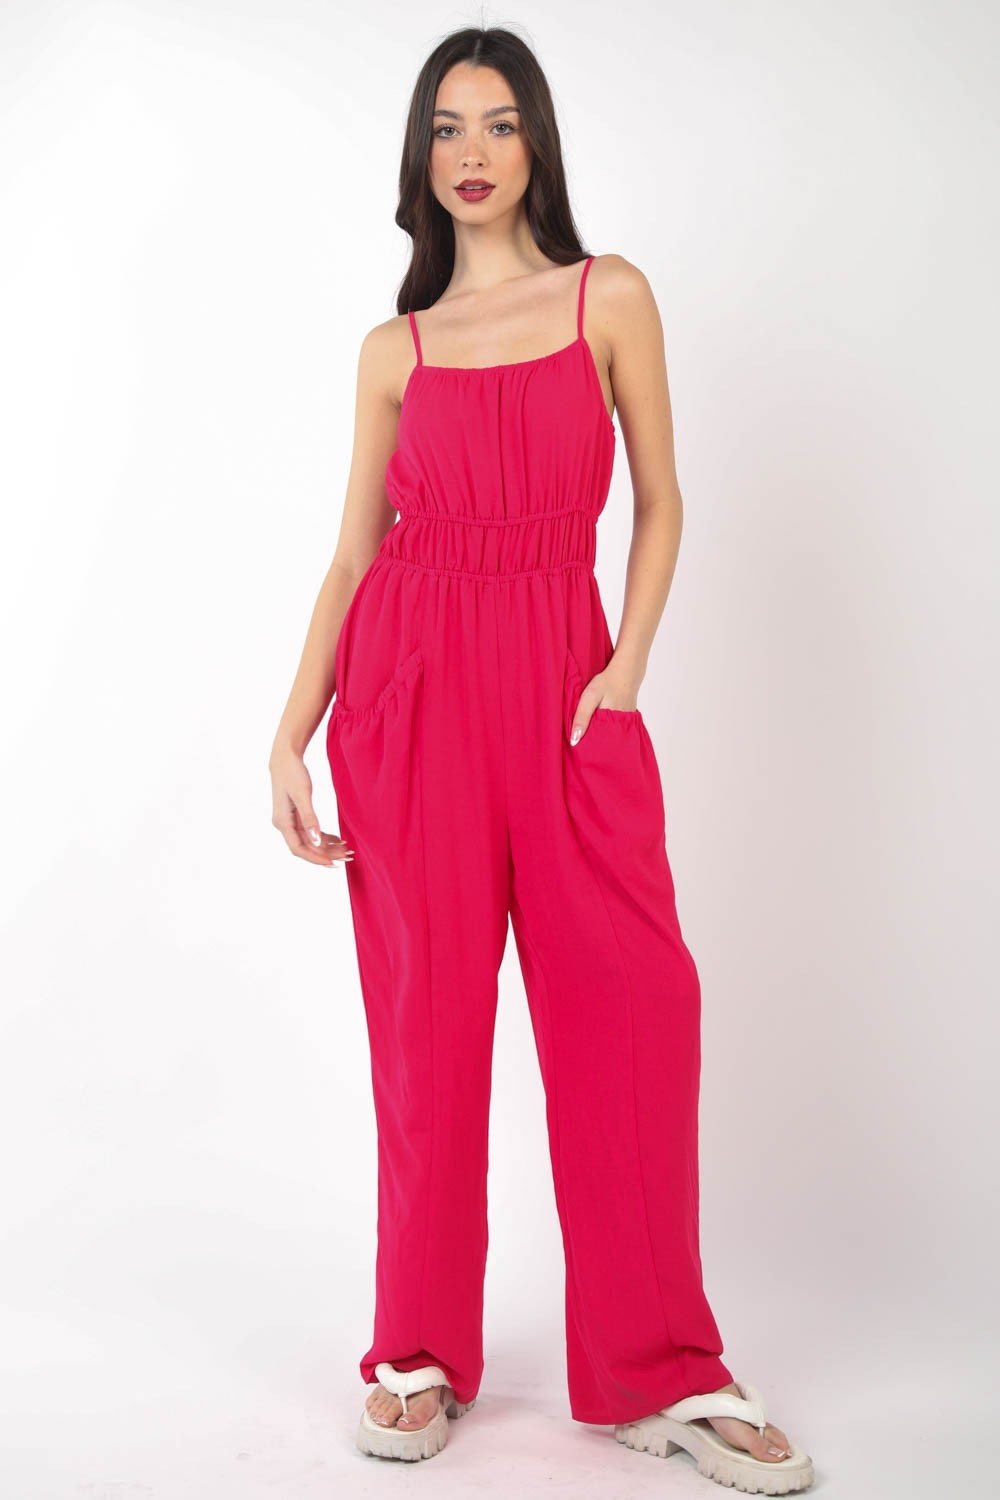 VERY J Pintuck Detail Woven Sleeveless Jumpsuit - Happily Ever Atchison Shop Co.